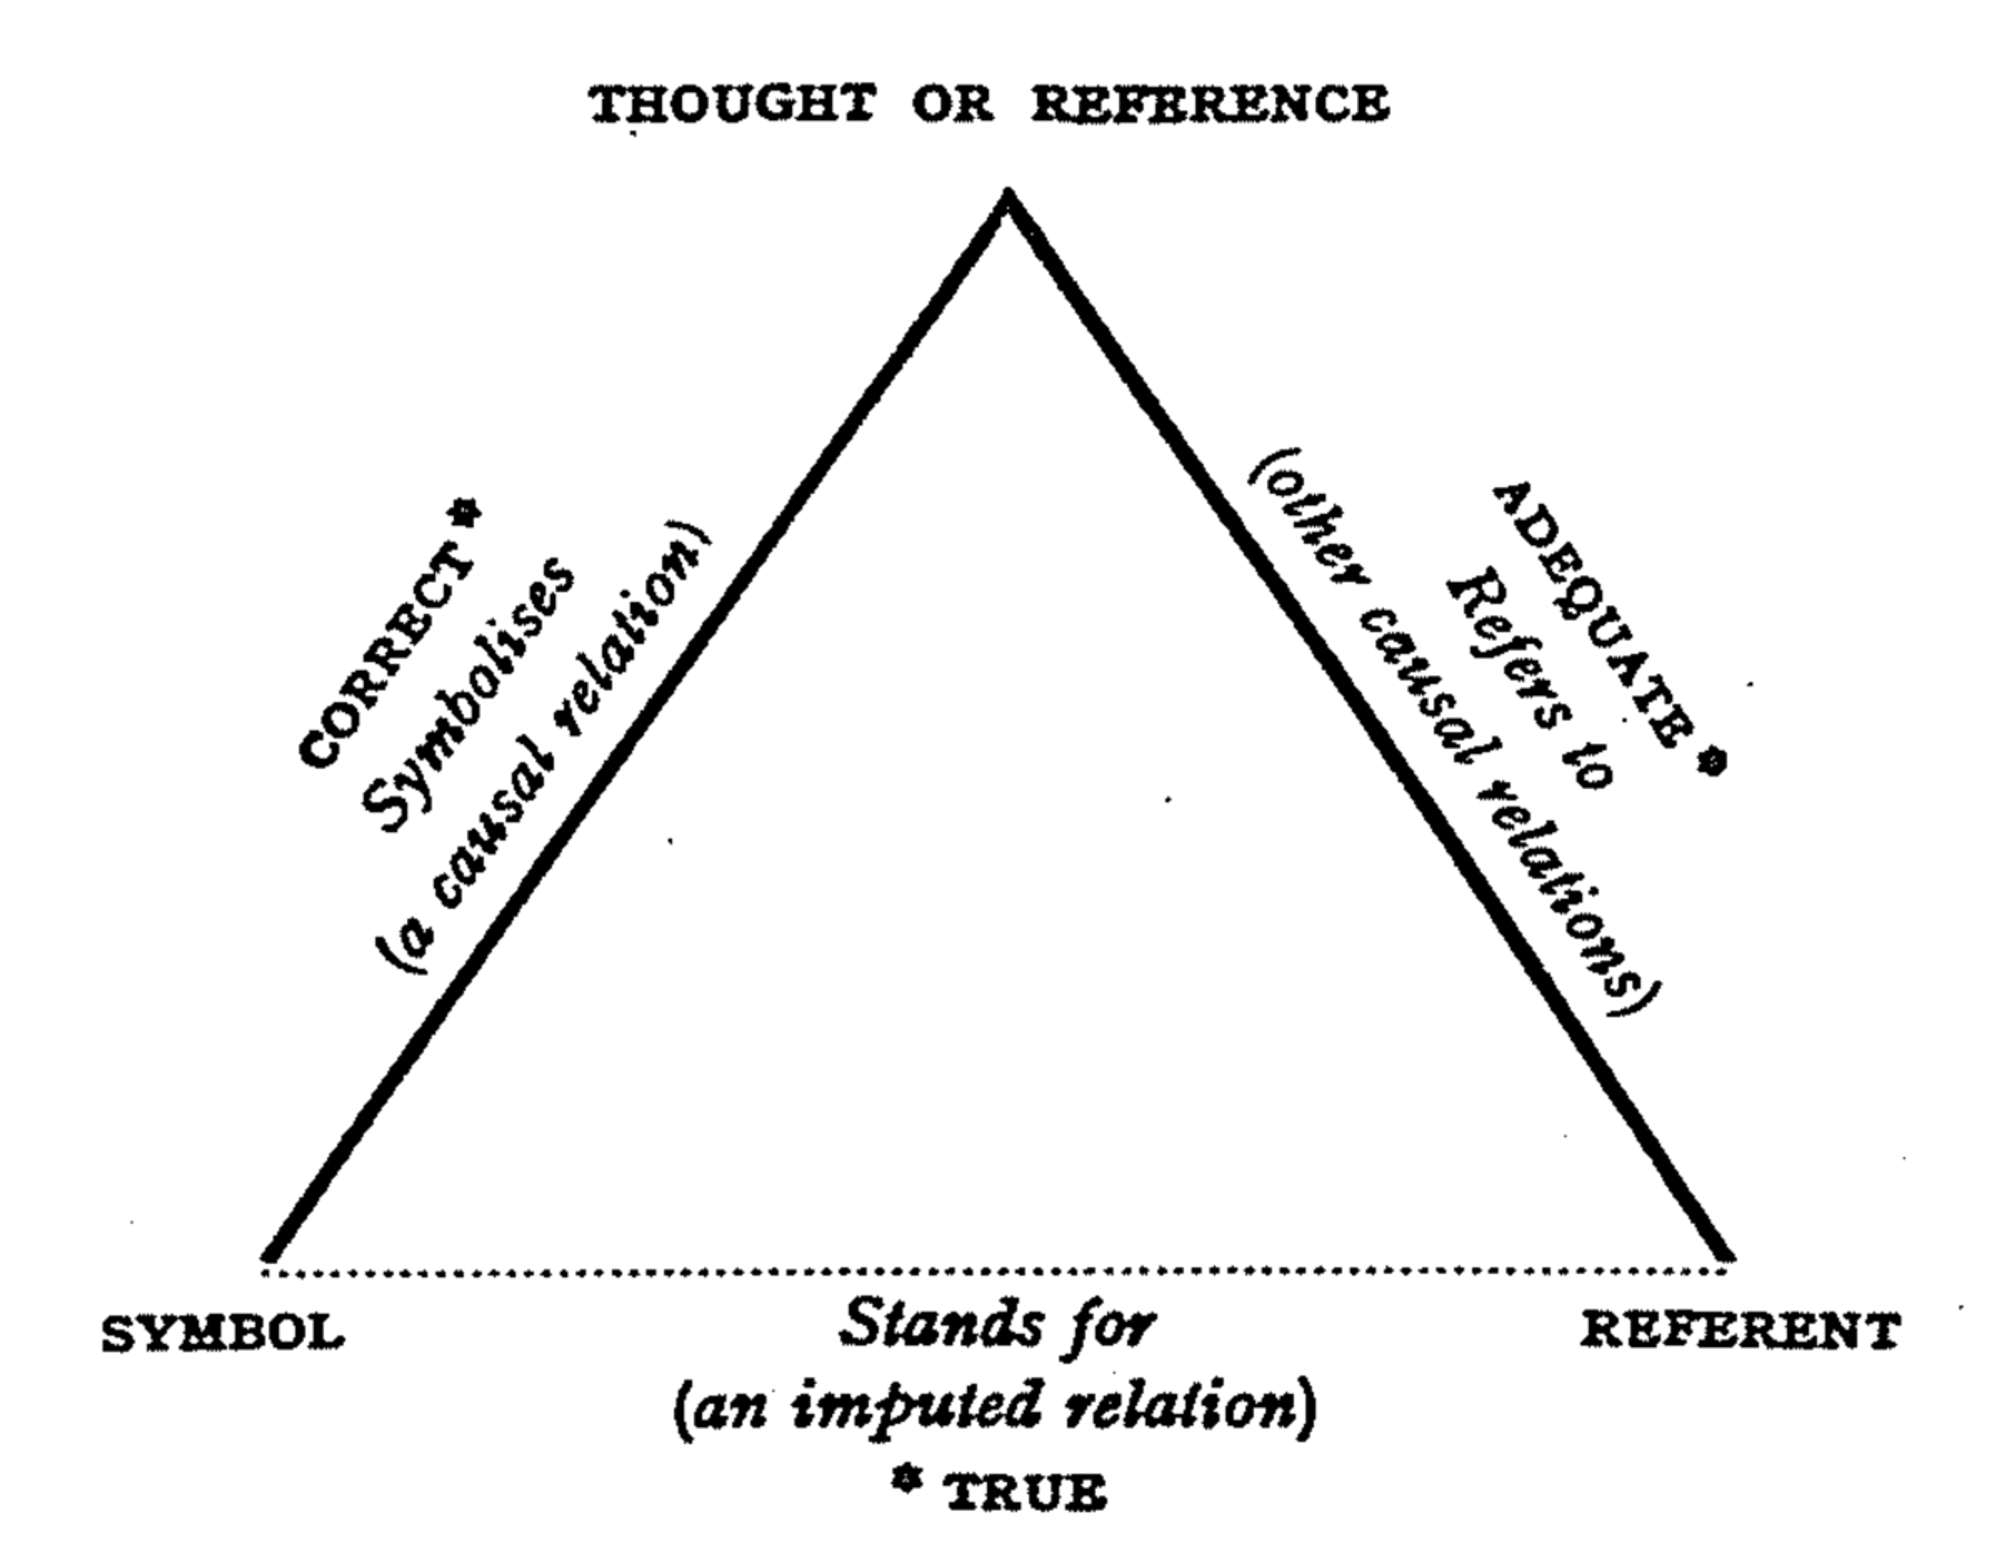 Triangle of reference - Wikipedia